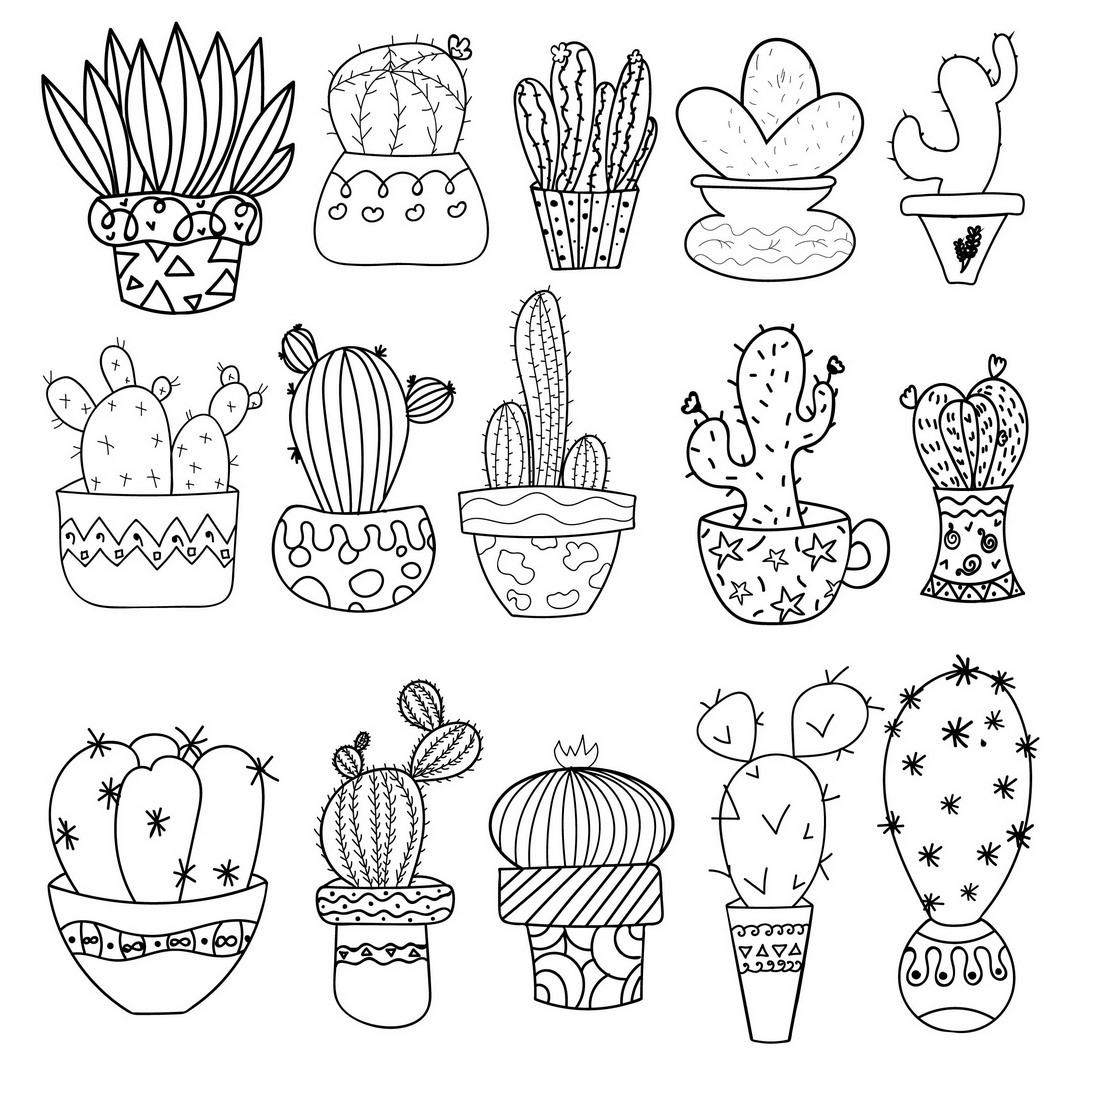 cactuses Cute cartoon characters are for kids and children design.